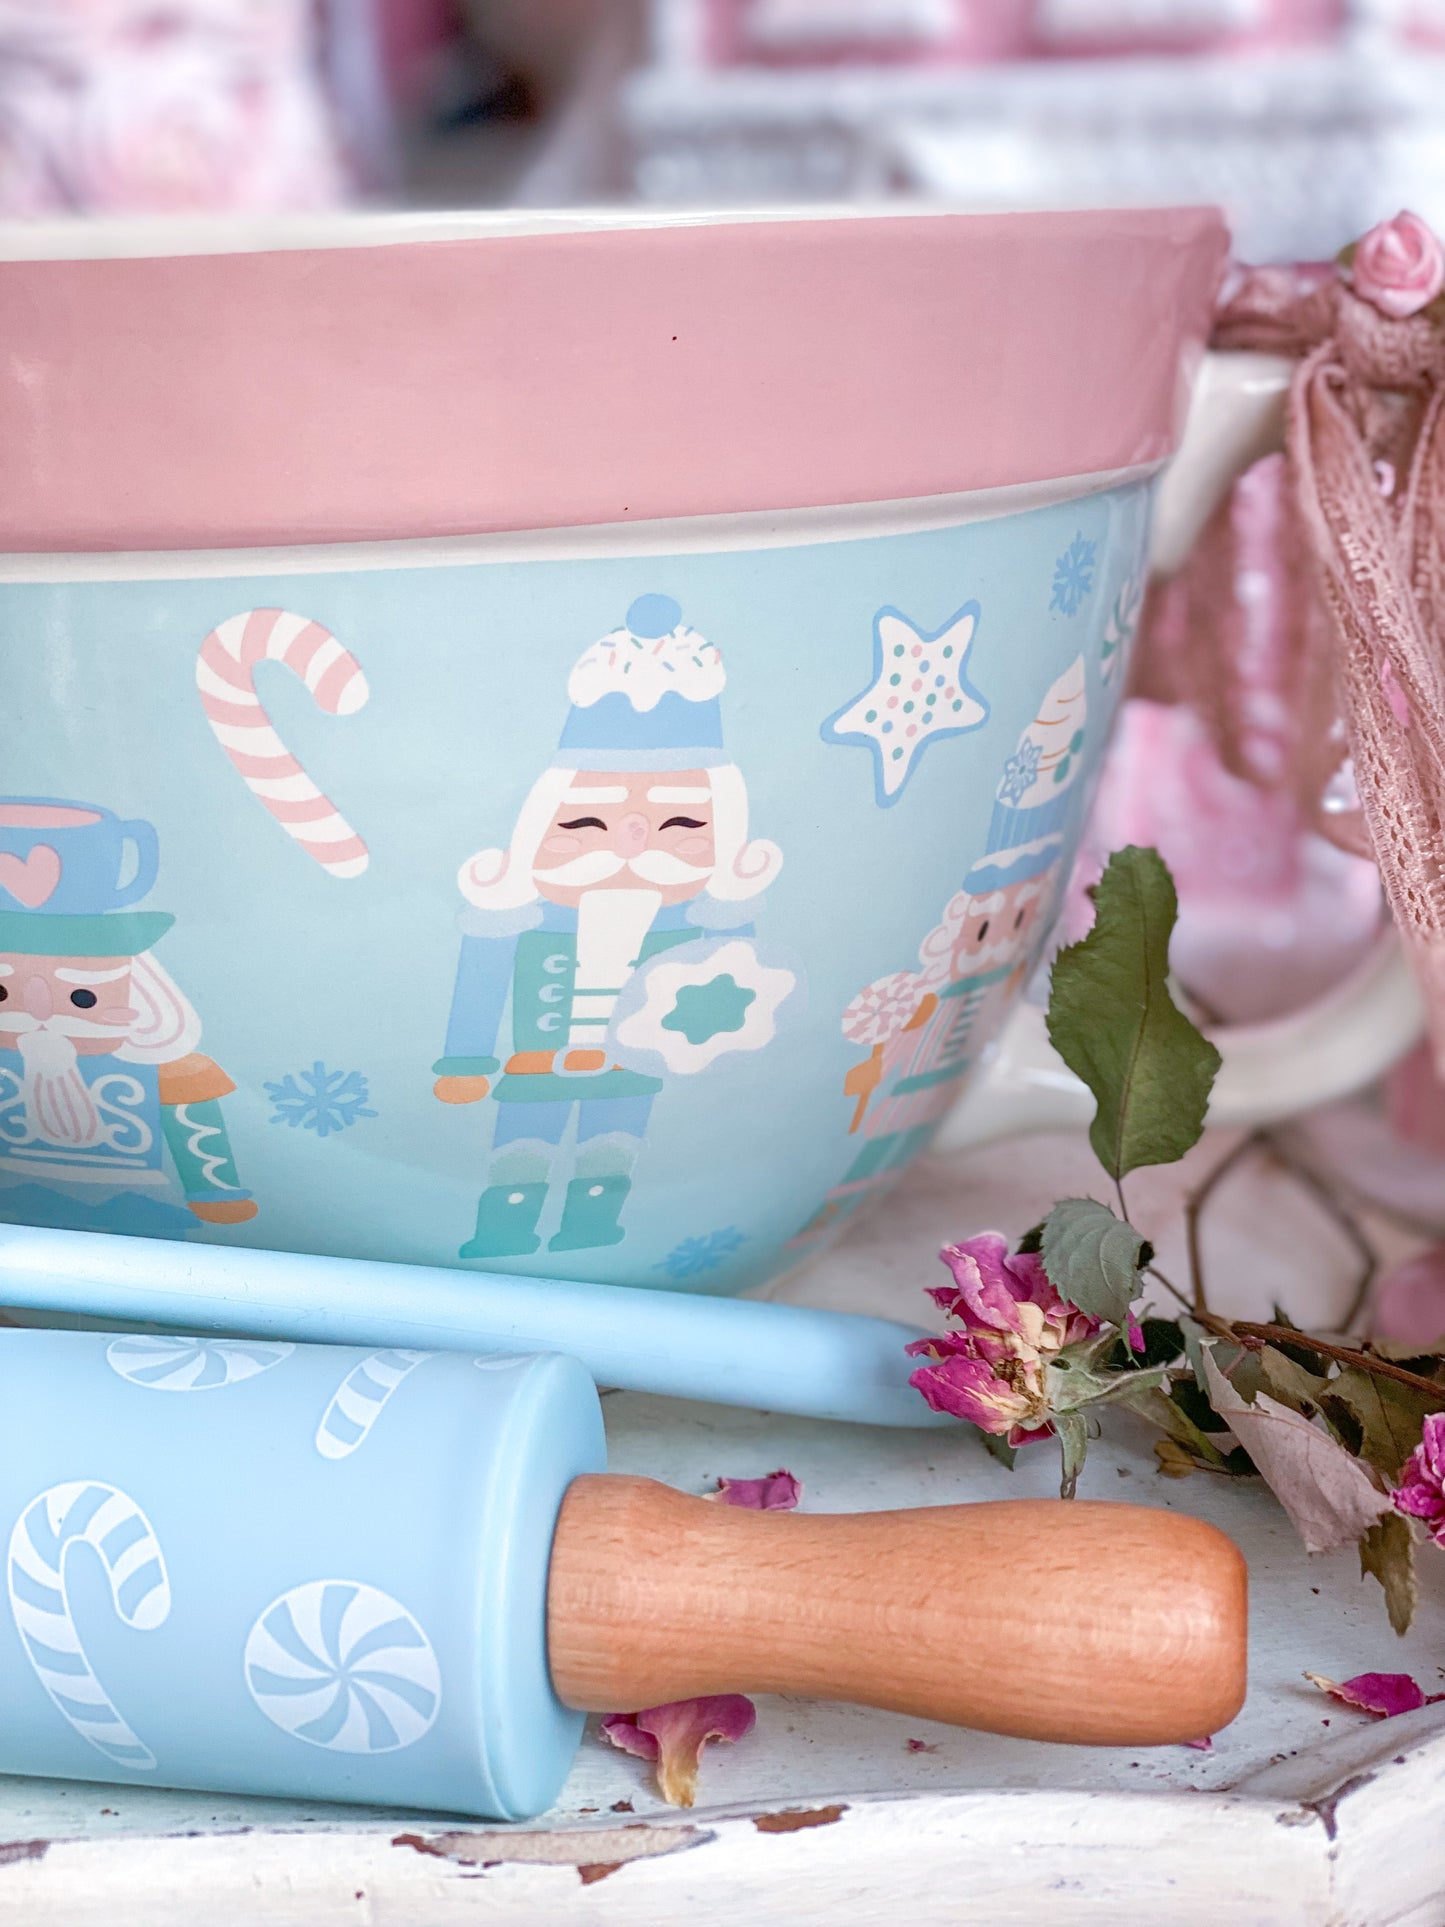 Pastel Pink and Blue Nutcracker Mixing Bowl w Rolling Pin, Spoon and Cookie Cutters